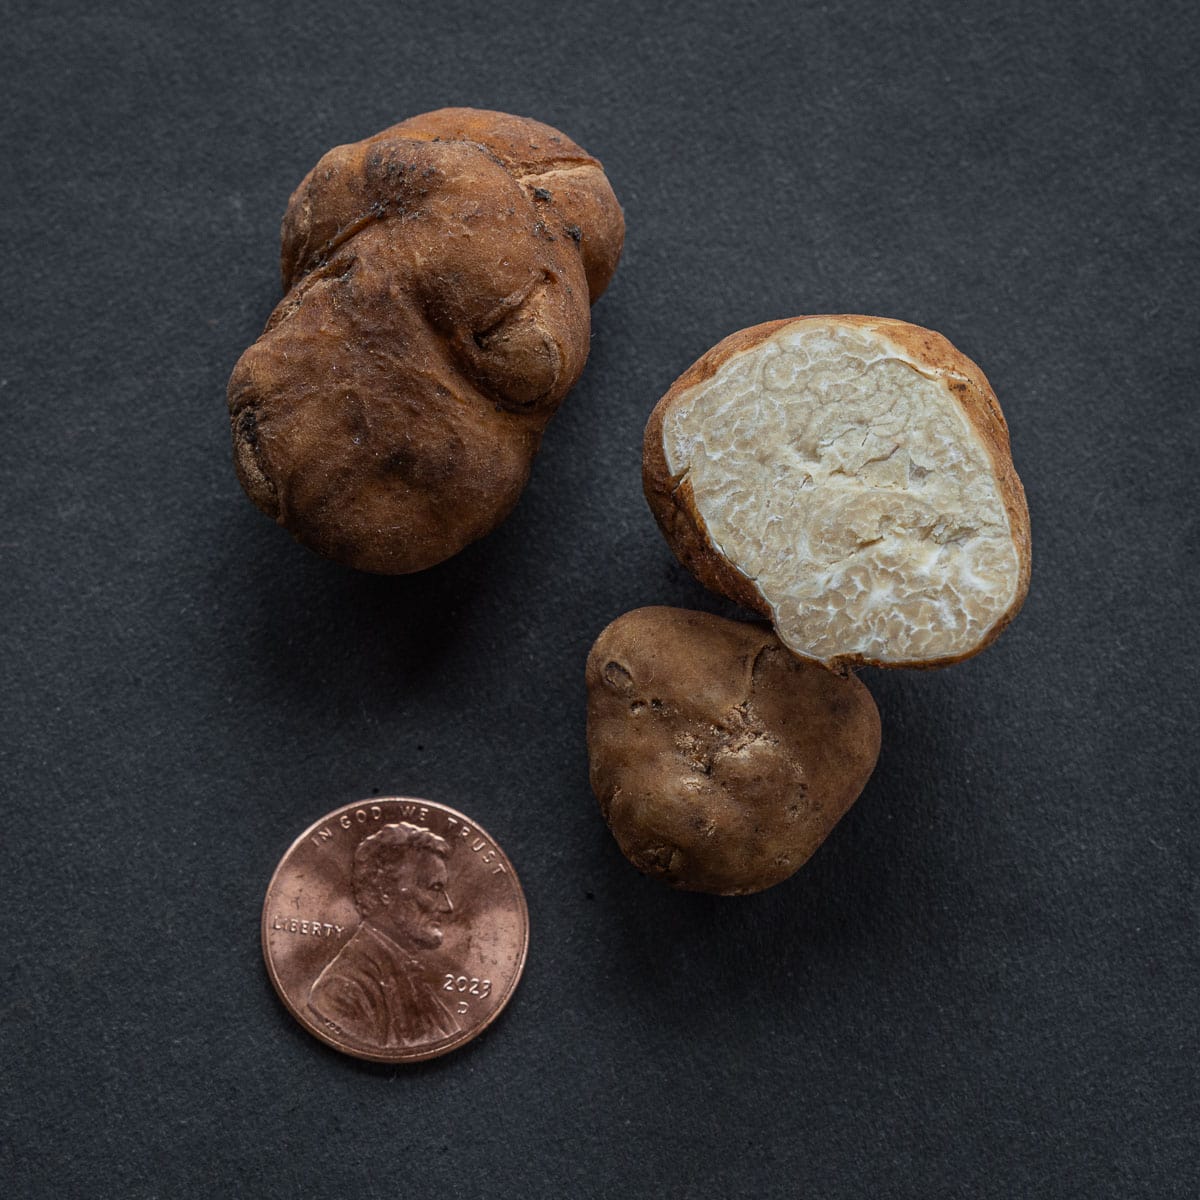 Pecan truffles (Tuber lyonii) from North Carolina next to a penny for scale. 